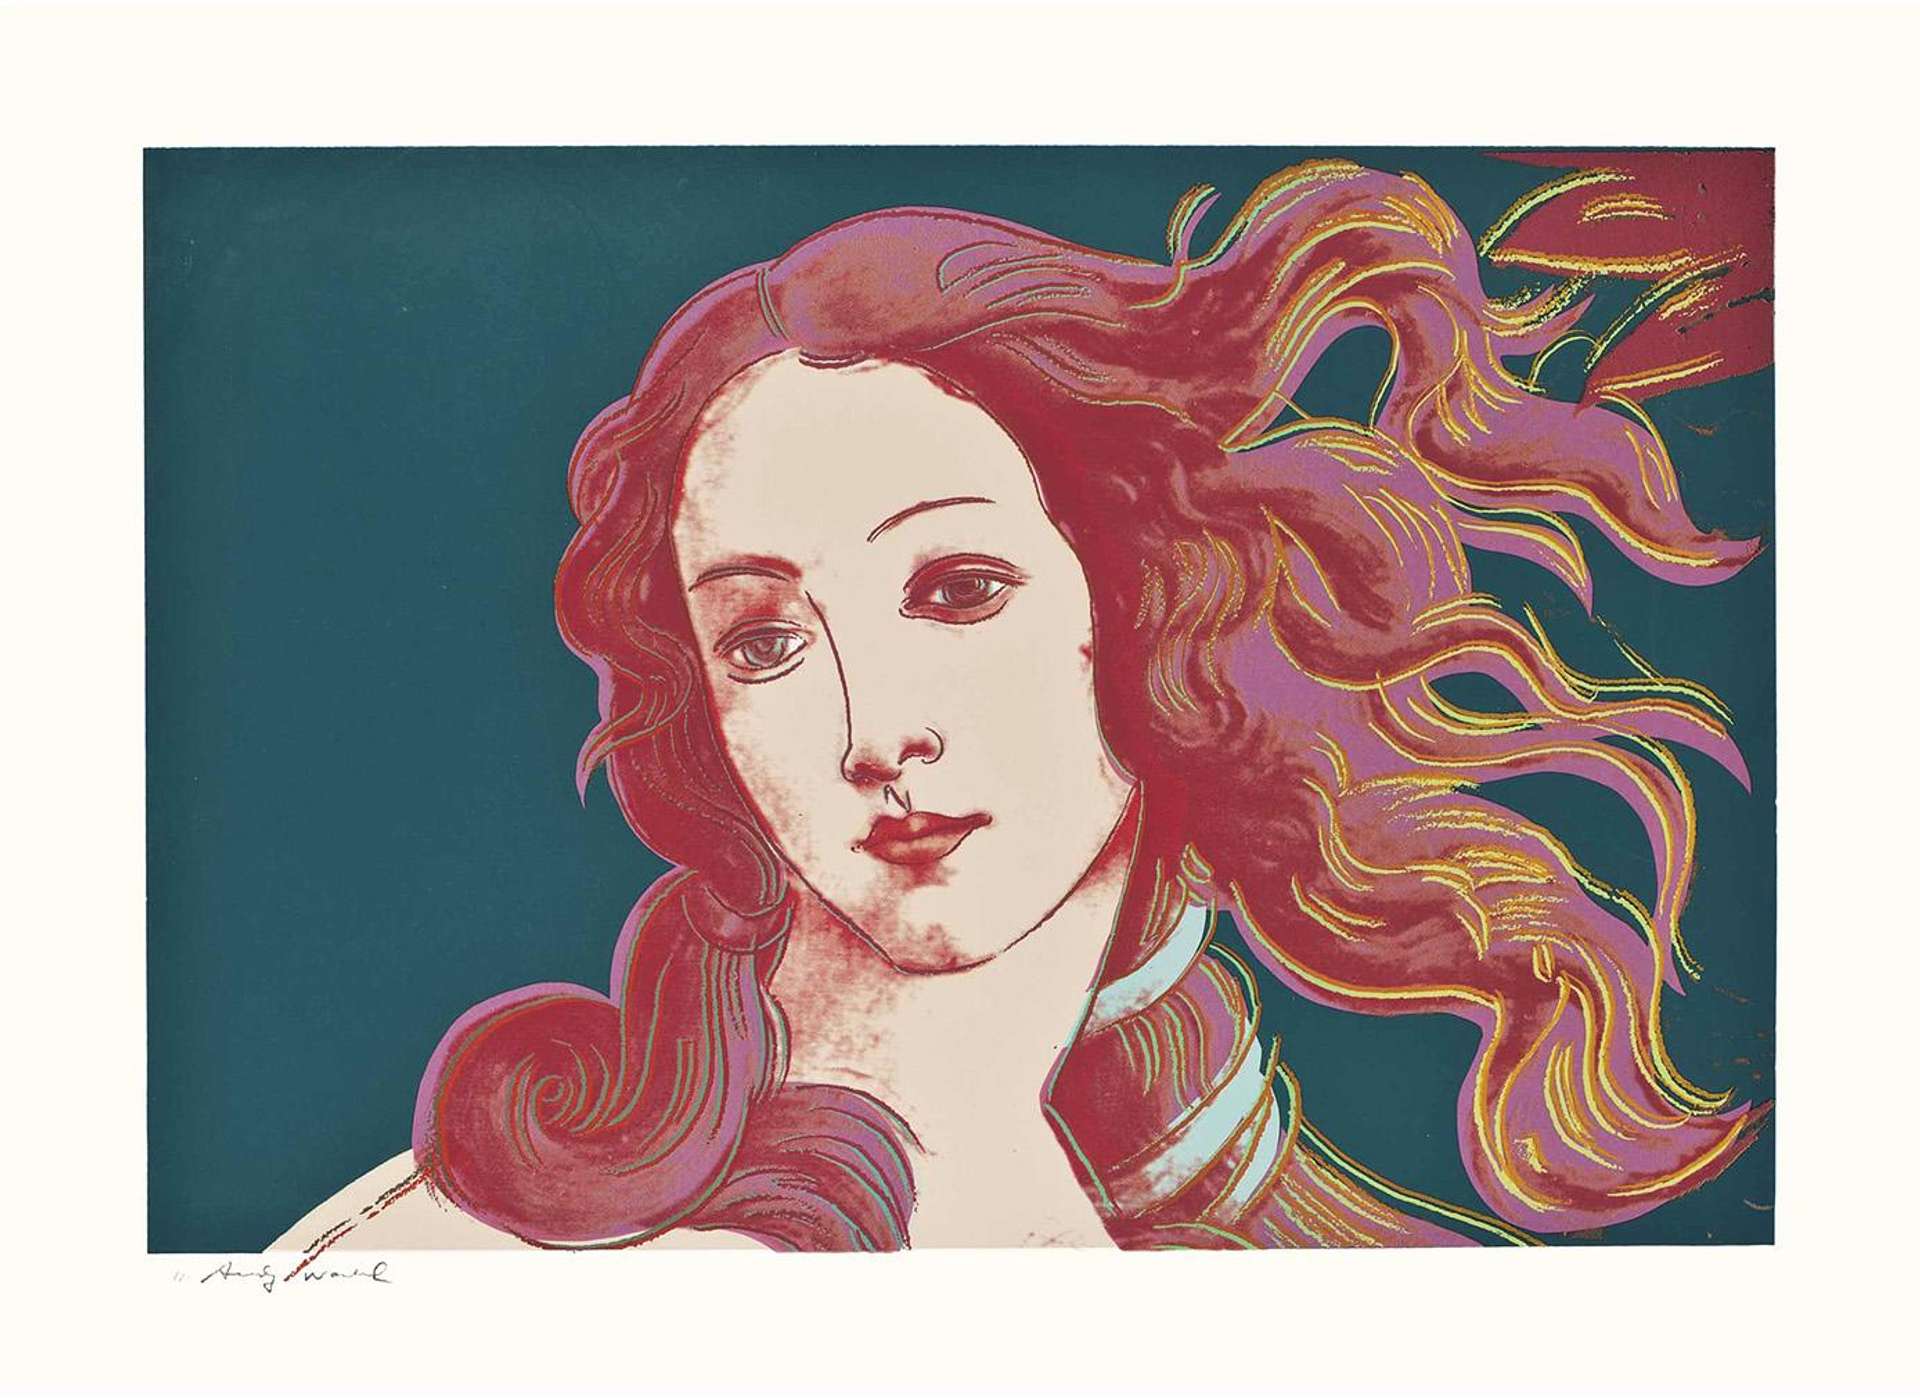 Andy Warhol’s Details Of Renaissance Paintings (Sandro Botticelli, Birth Of Venus, 1482) (F. & S. II.316), a Pop Art style close-up image of a woman with her red-coloured hair flowing in the wind against a teal background.